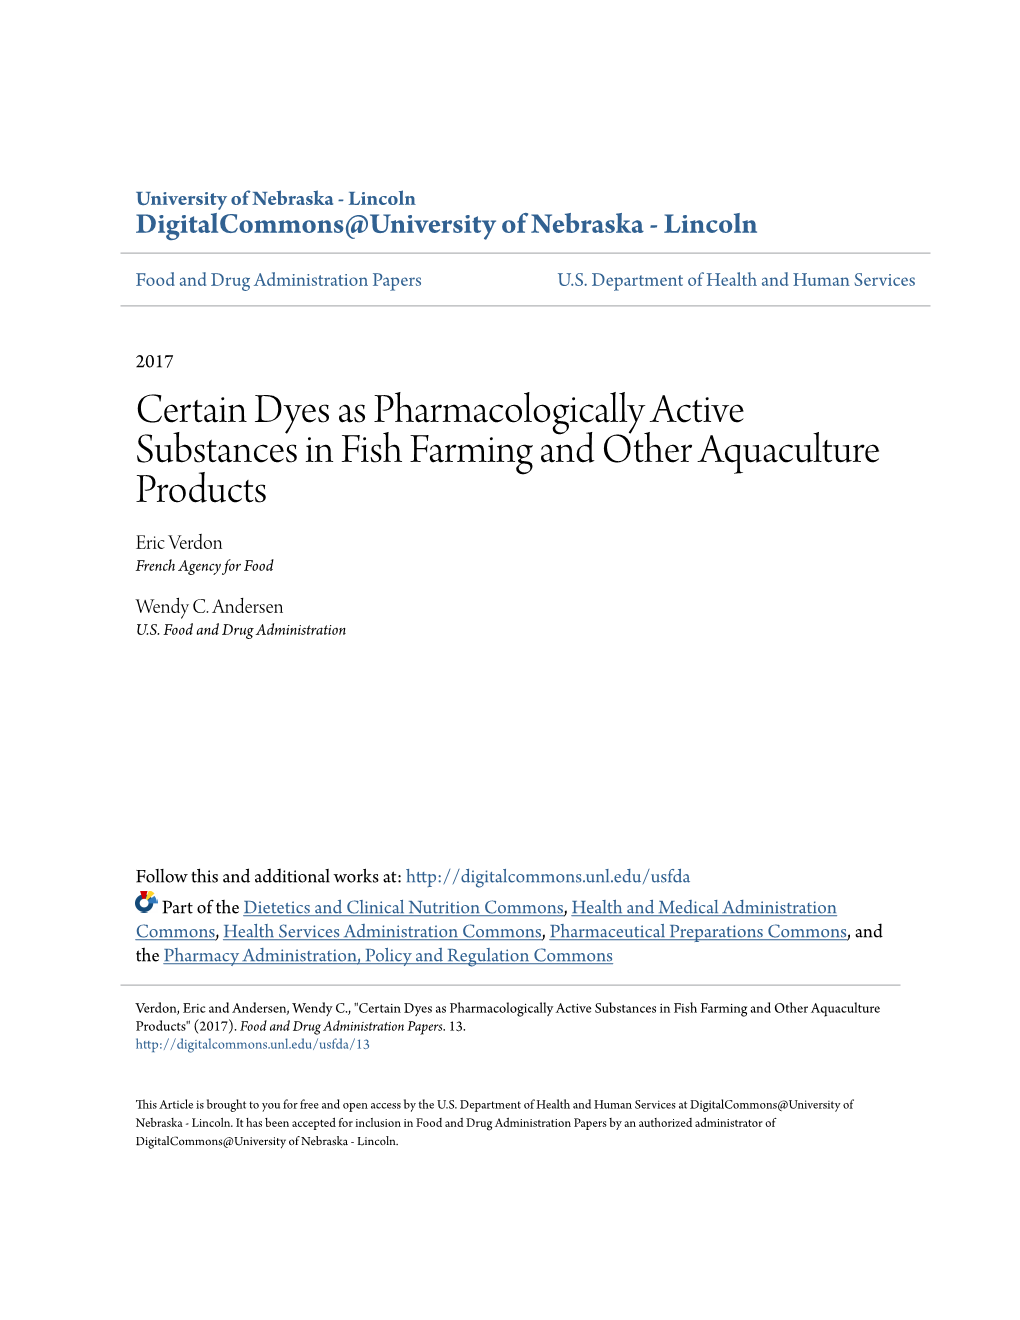 Certain Dyes As Pharmacologically Active Substances in Fish Farming and Other Aquaculture Products Eric Verdon French Agency for Food